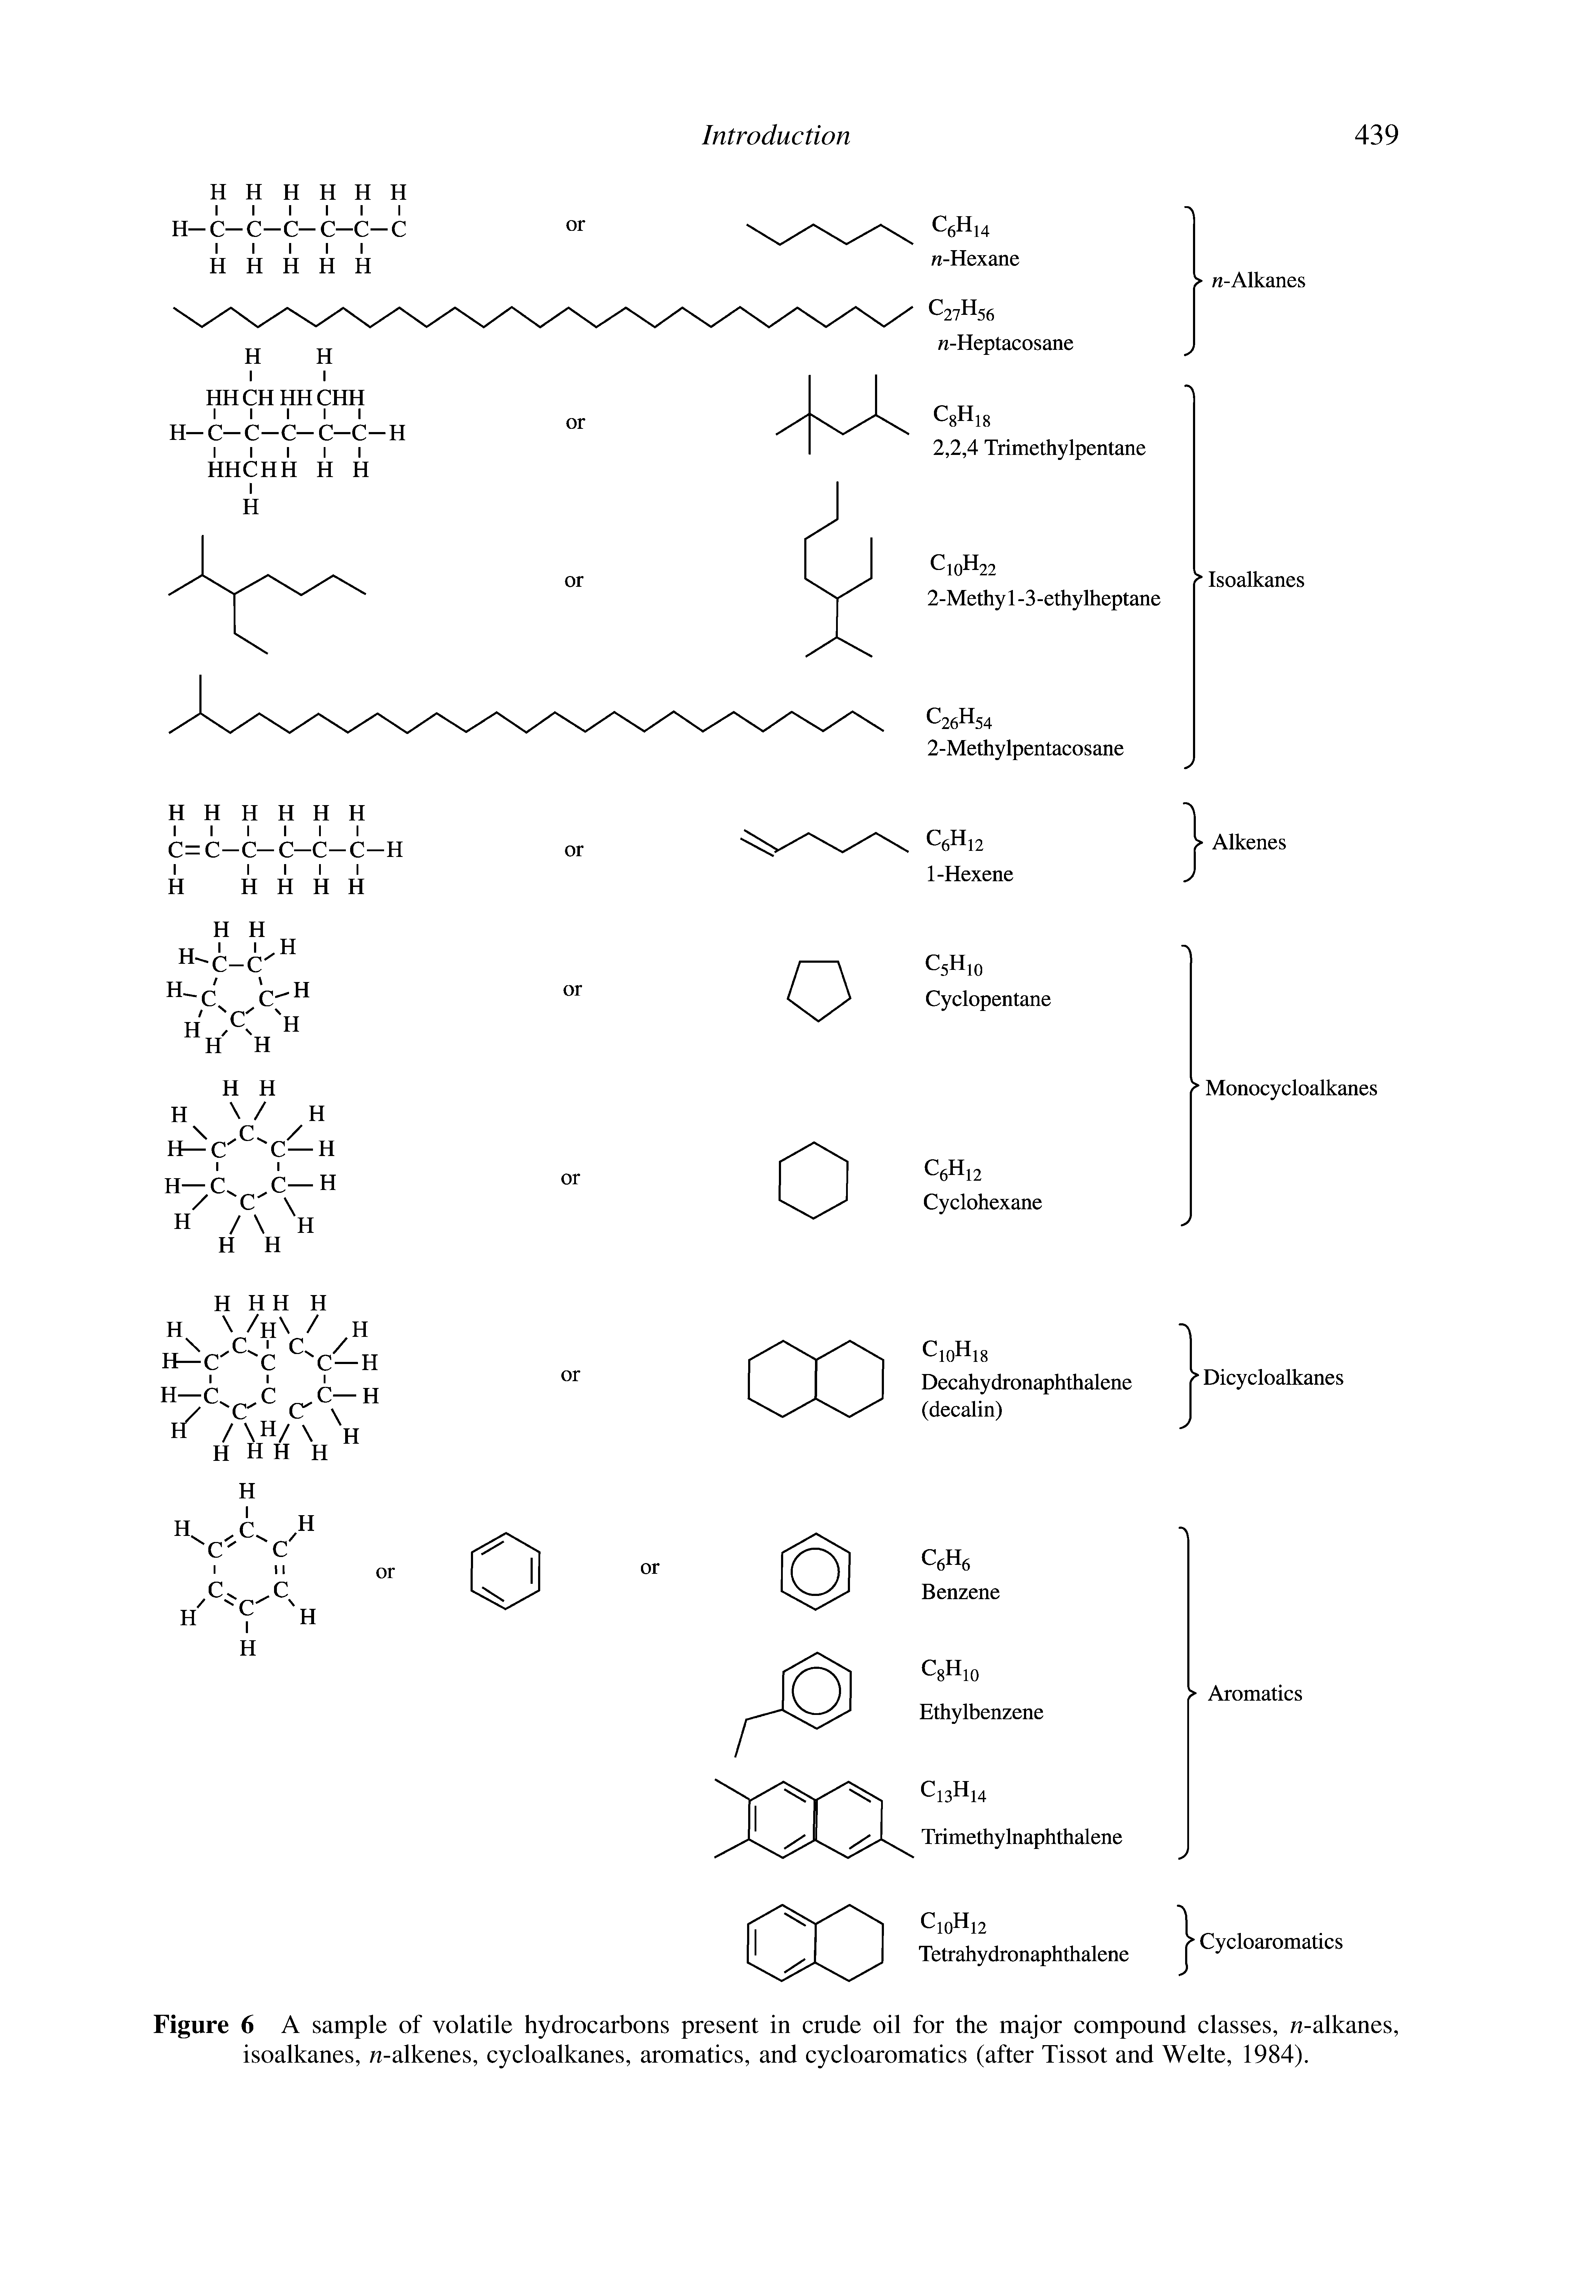 Figure 6 A sample of volatile hydrocarbons present in crude oil for the major compound classes, n-alkanes, isoalkanes, n-alkenes, cycloalkanes, aromatics, and cycloaromatics (after Tissot and Welte, 1984).